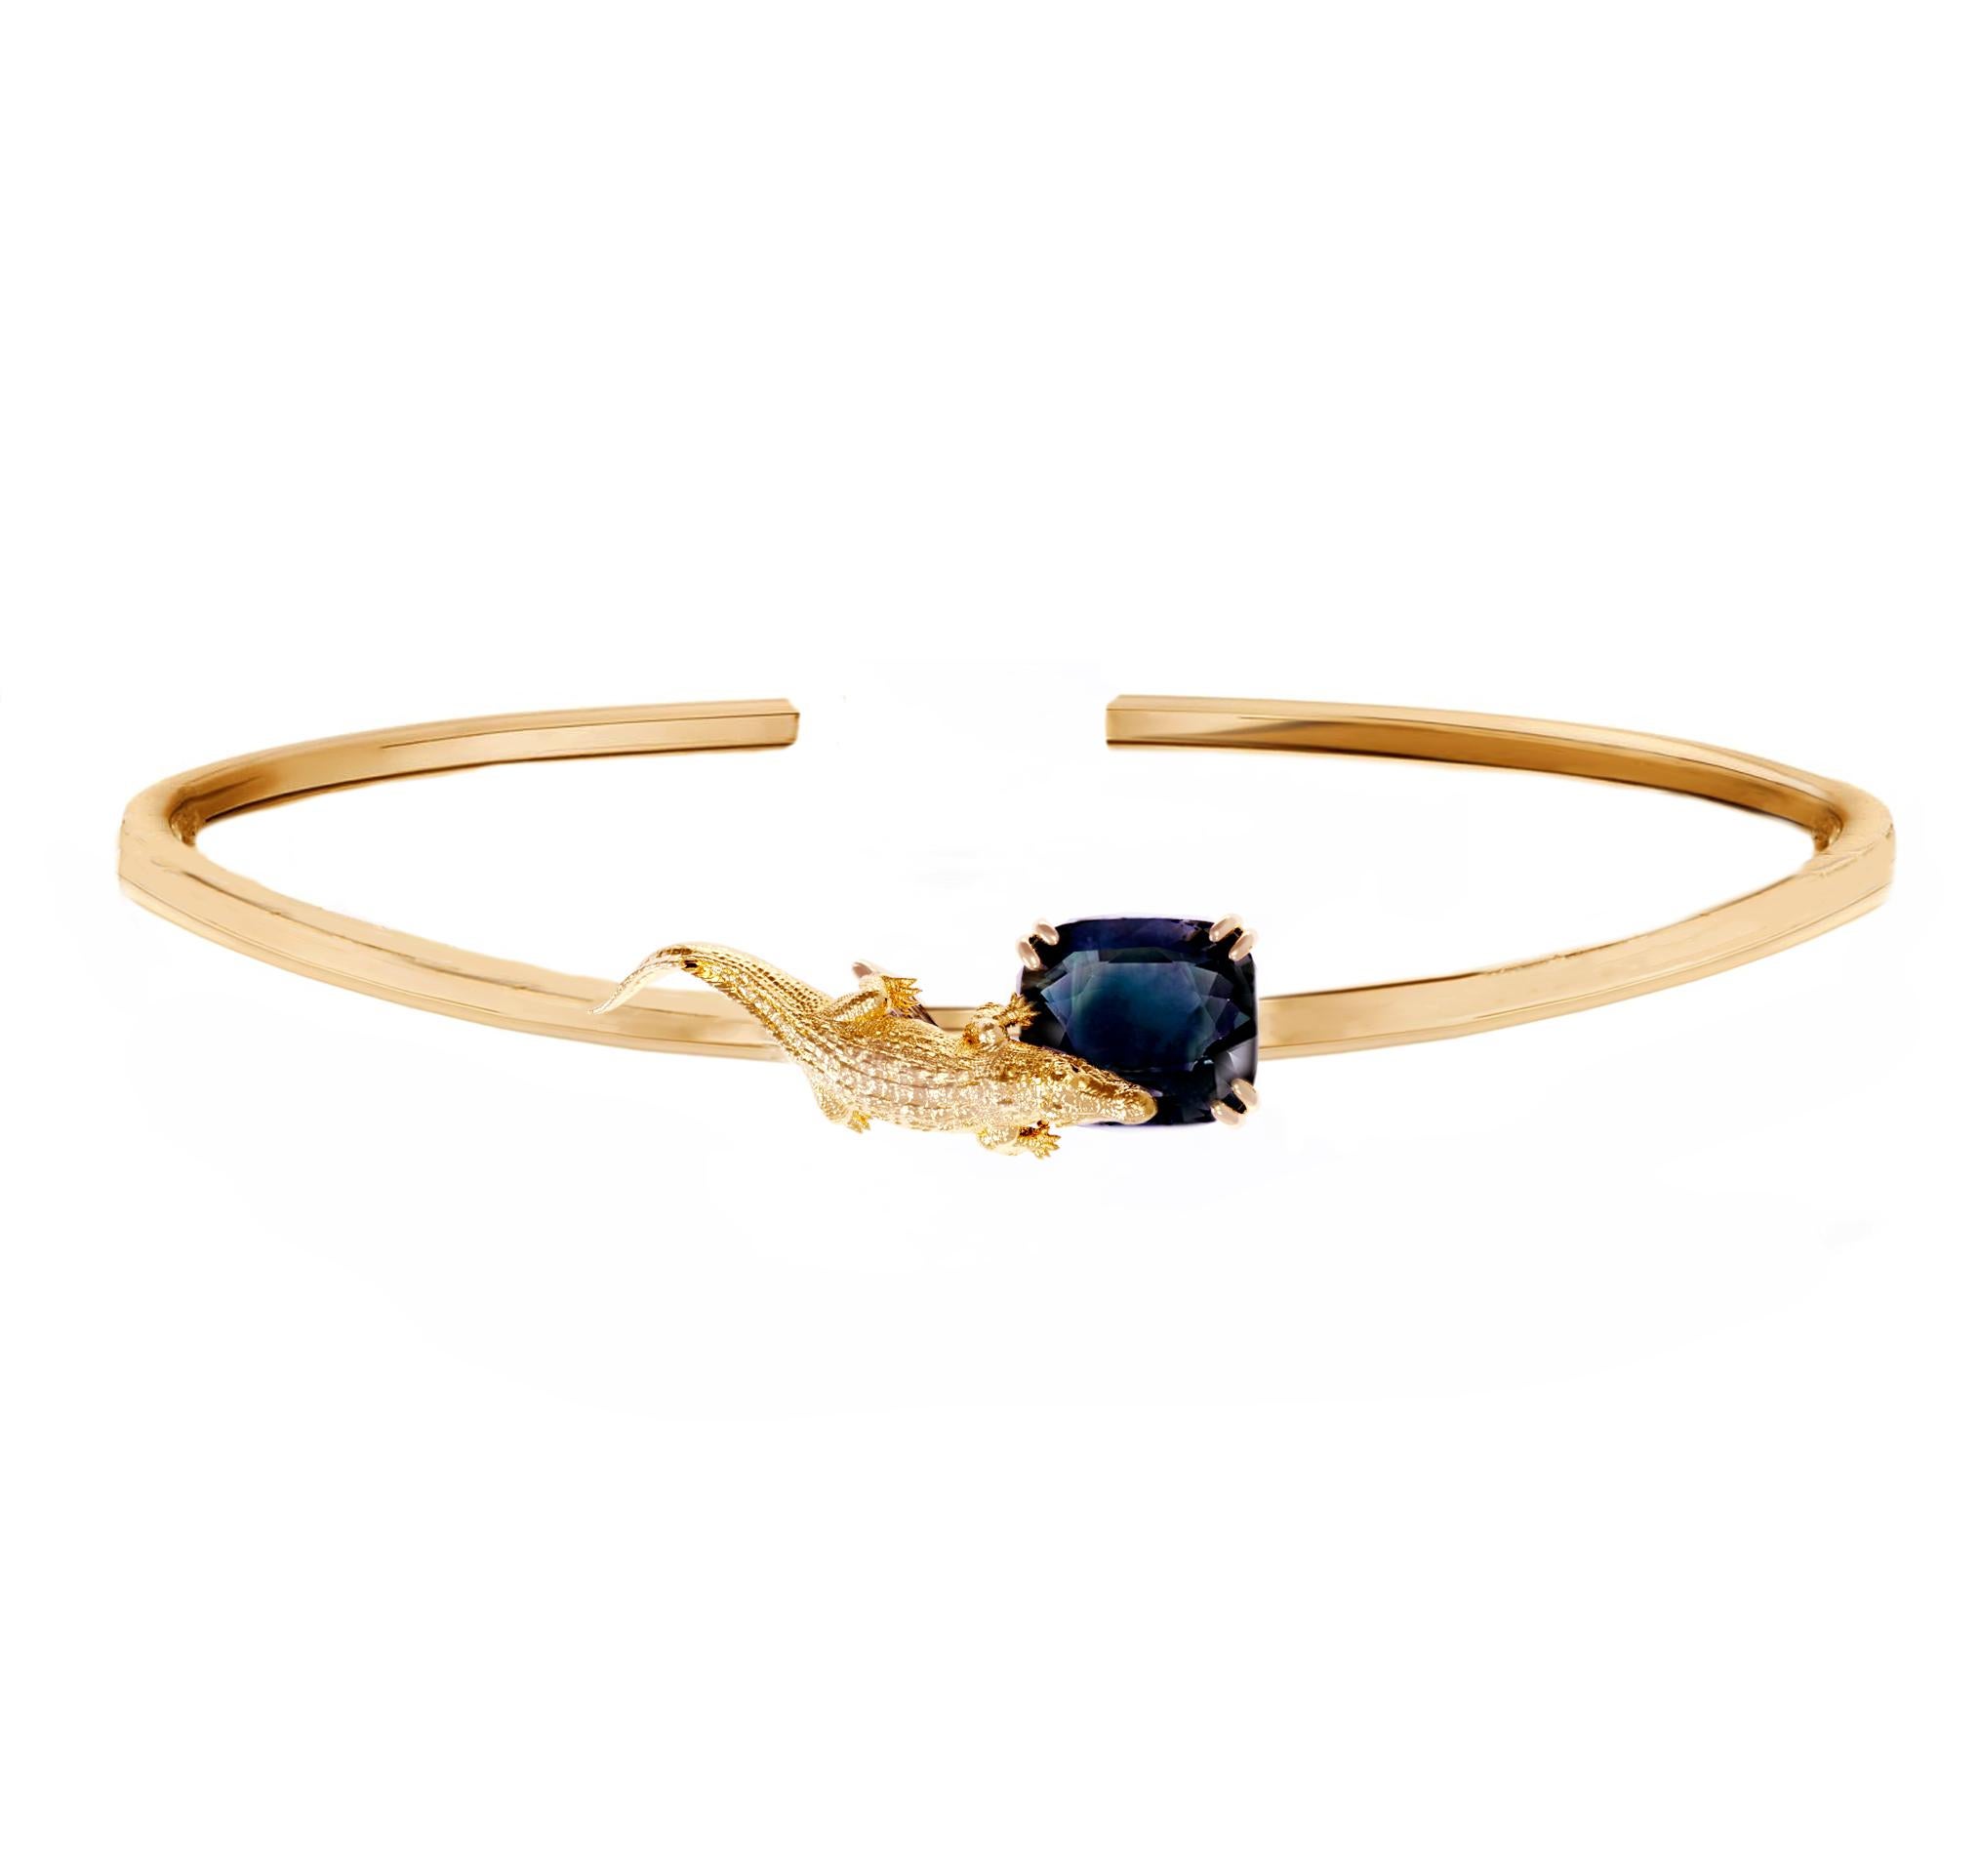 White Gold Sculptural Bangle Bracelet with Four Carats Blue Sapphire For Sale 4